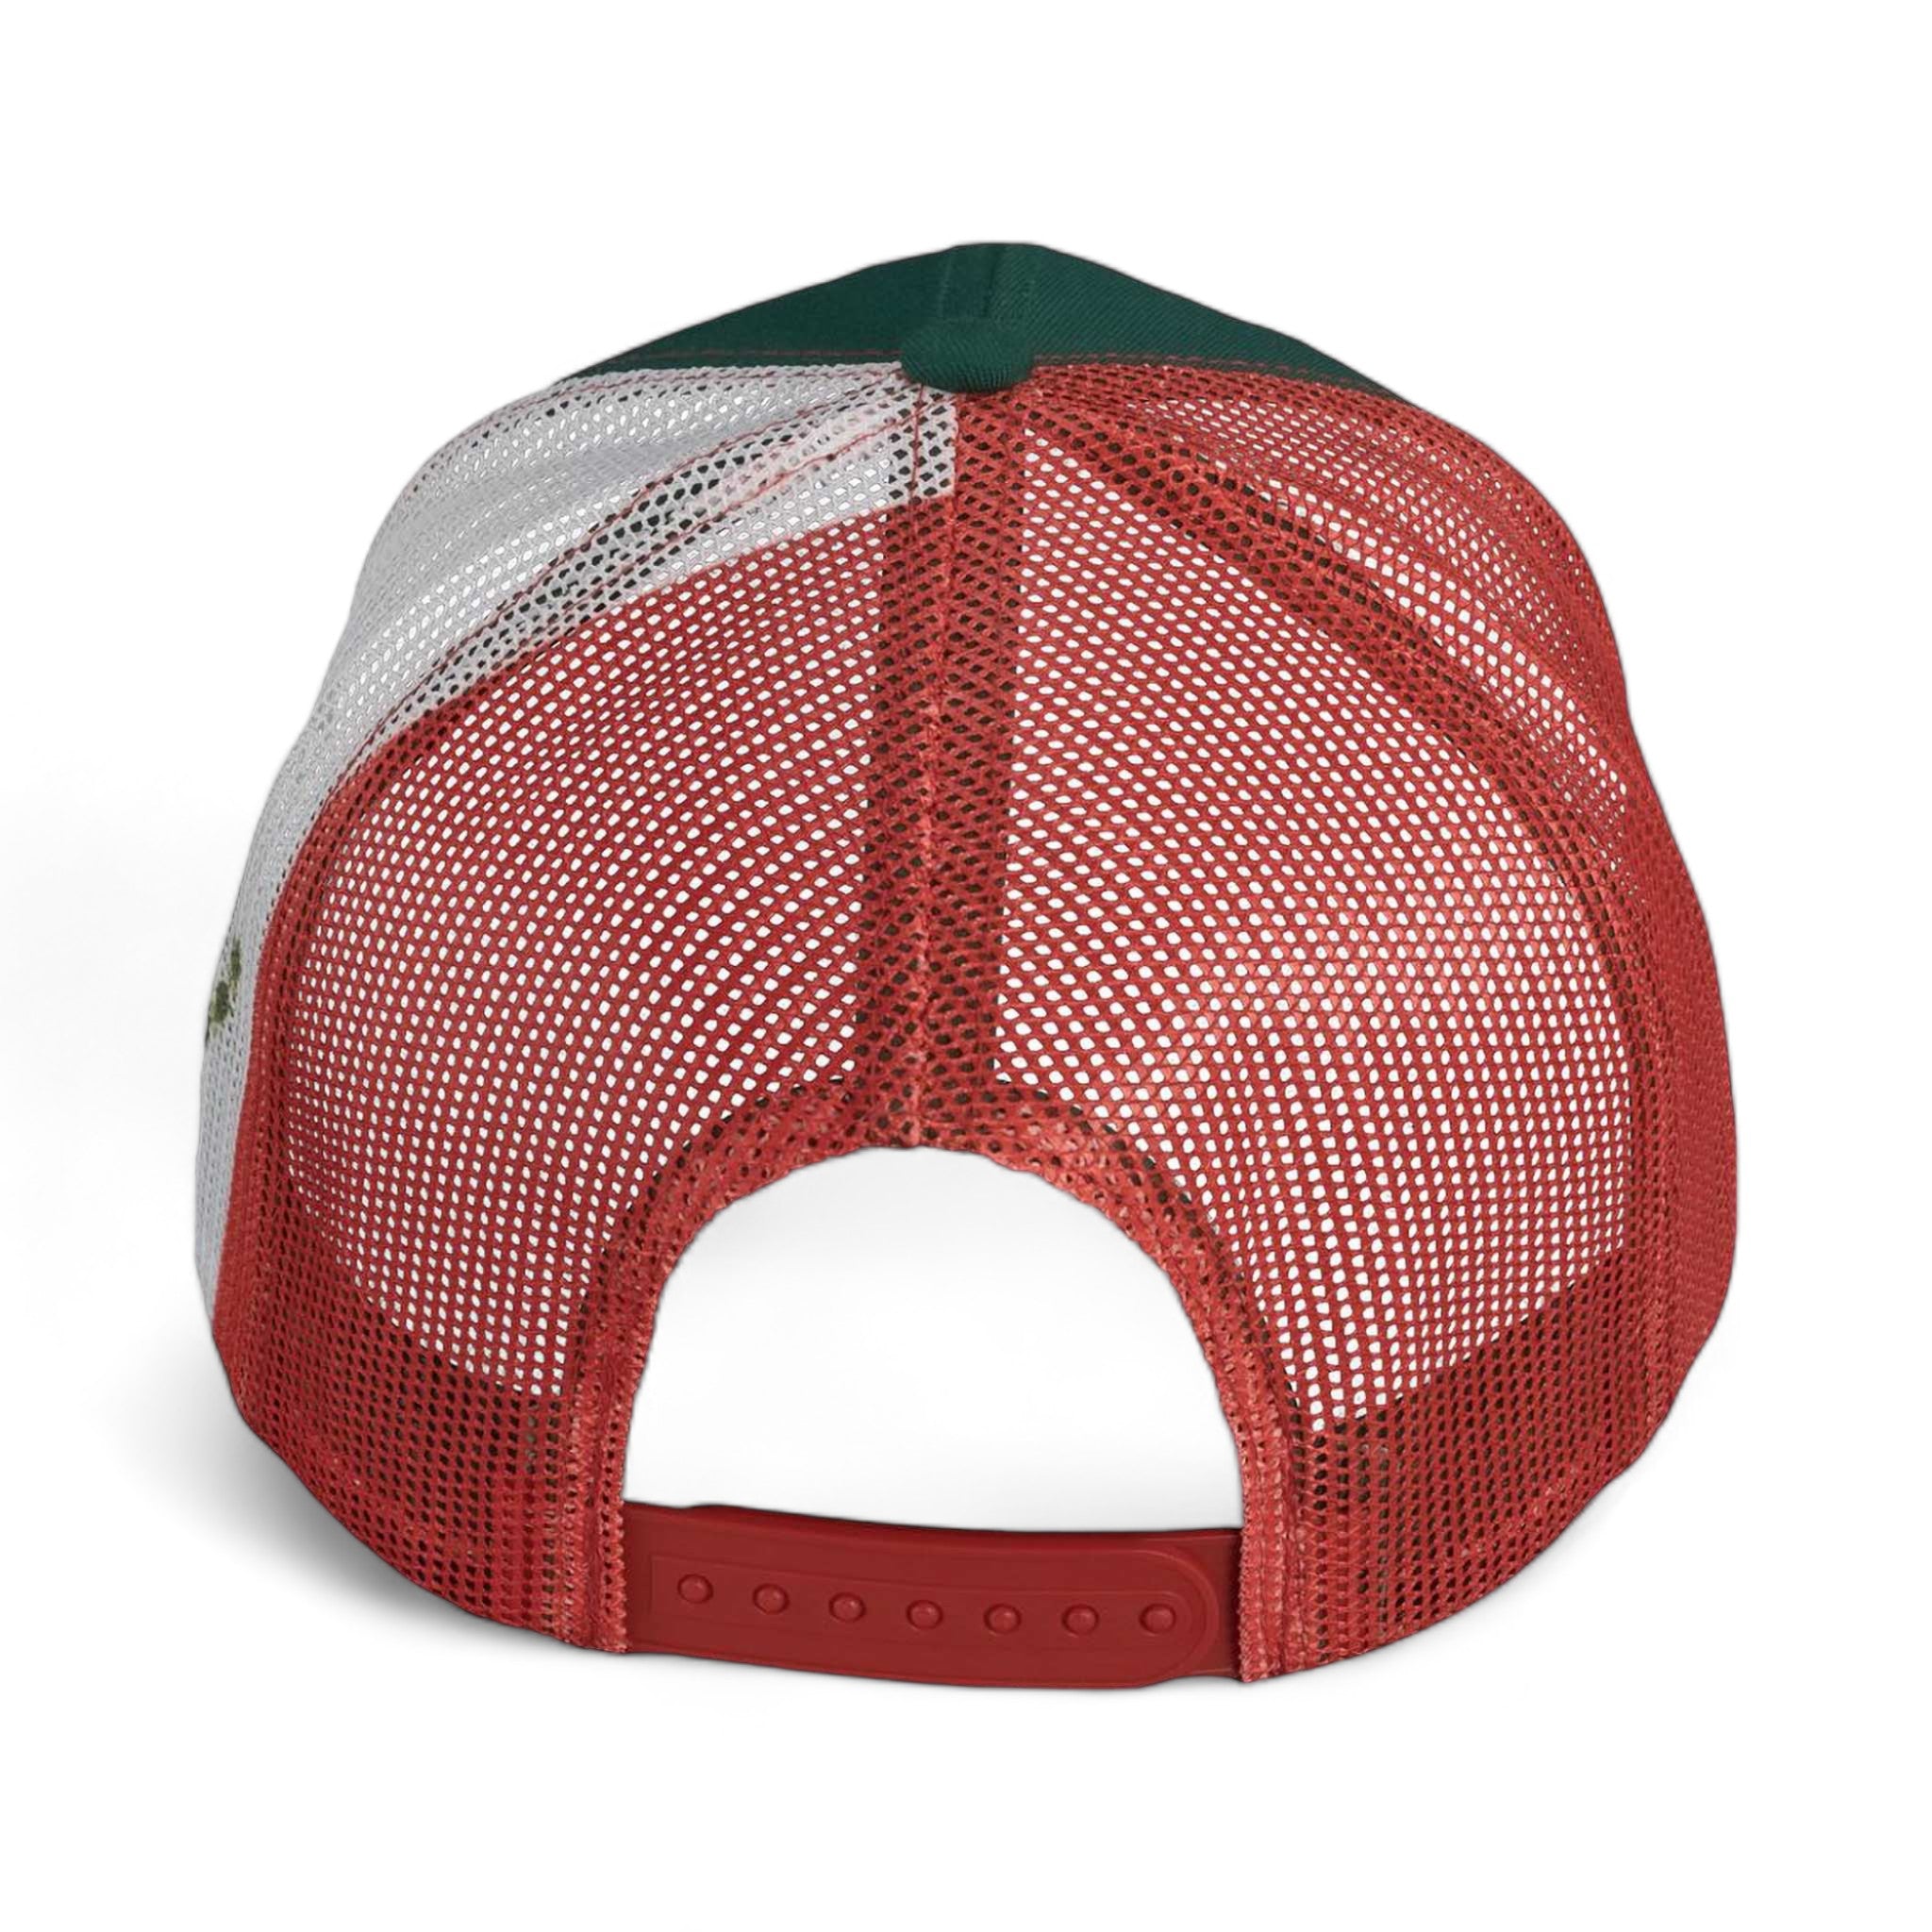 Back view of Kati S700M custom hat in dark green, red and mexico flag